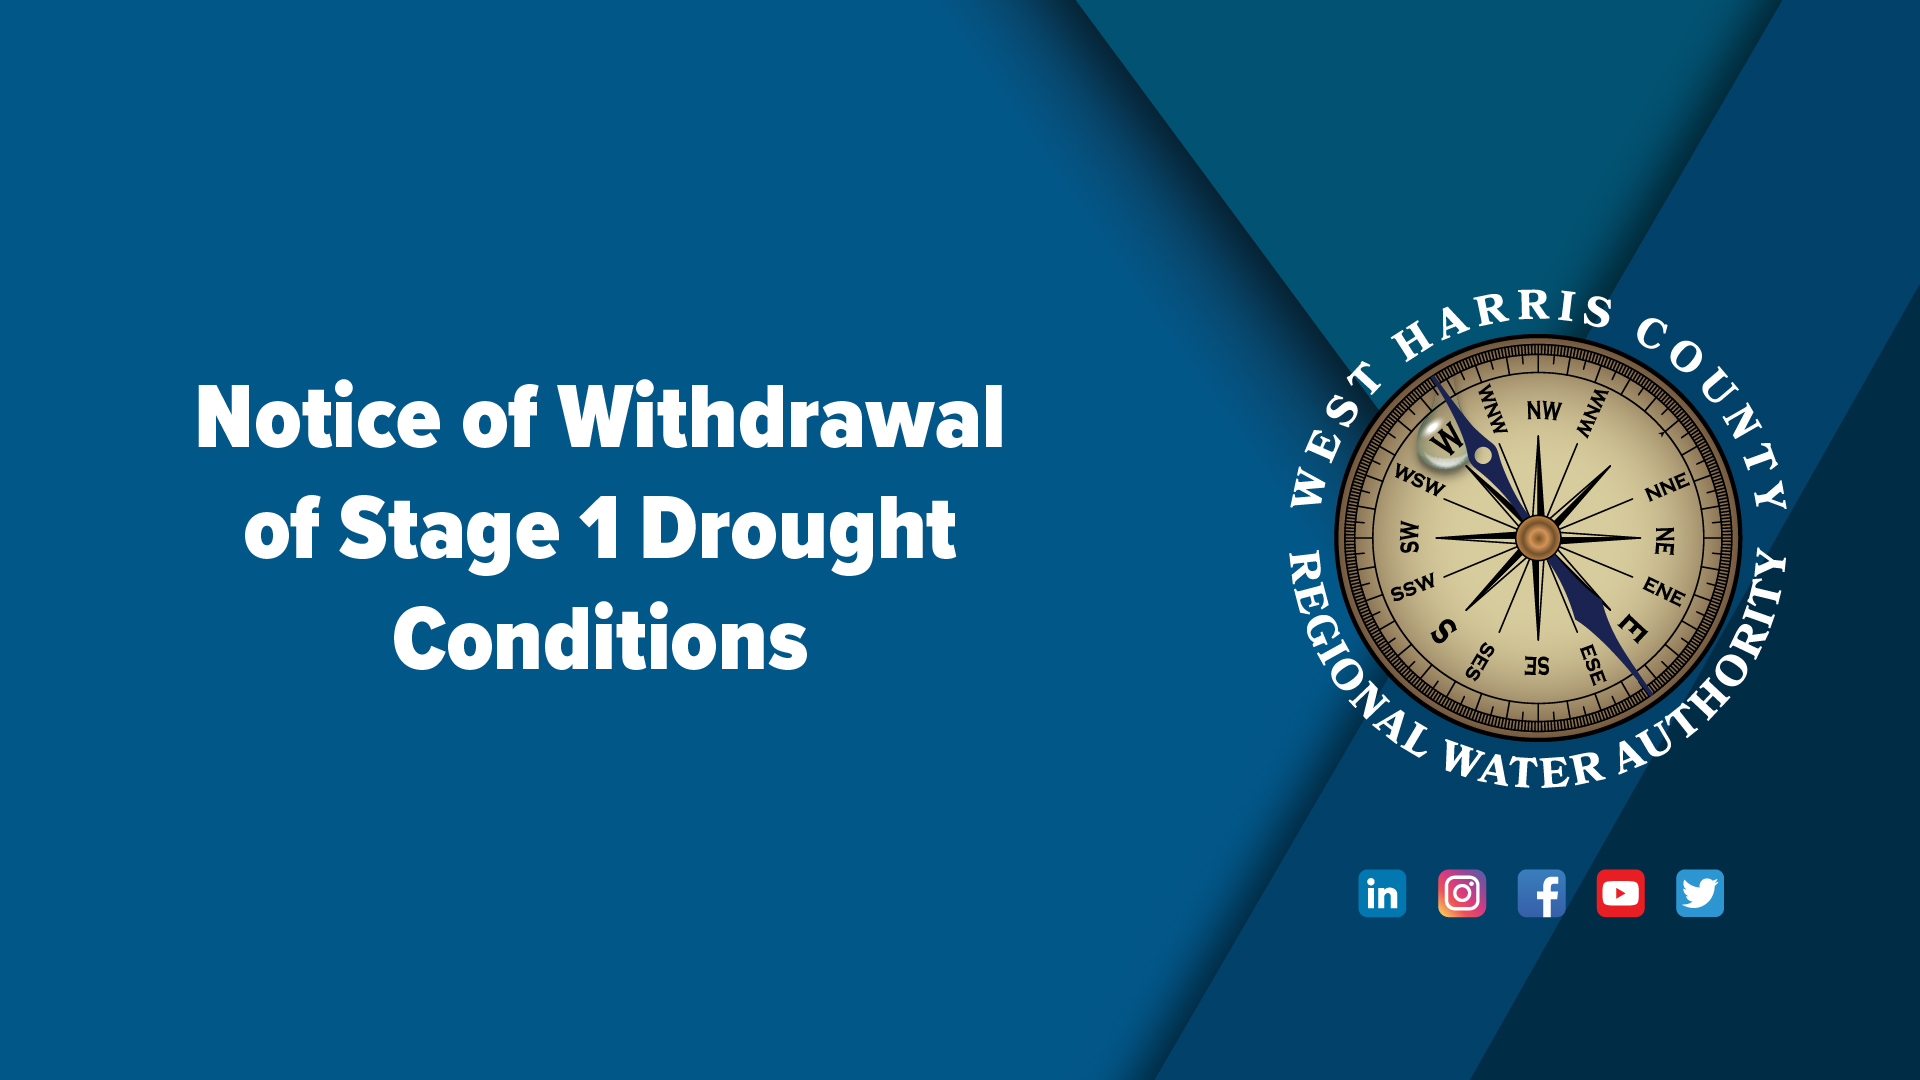 Notice of Withdrawal of Stage 1 Drought Conditions